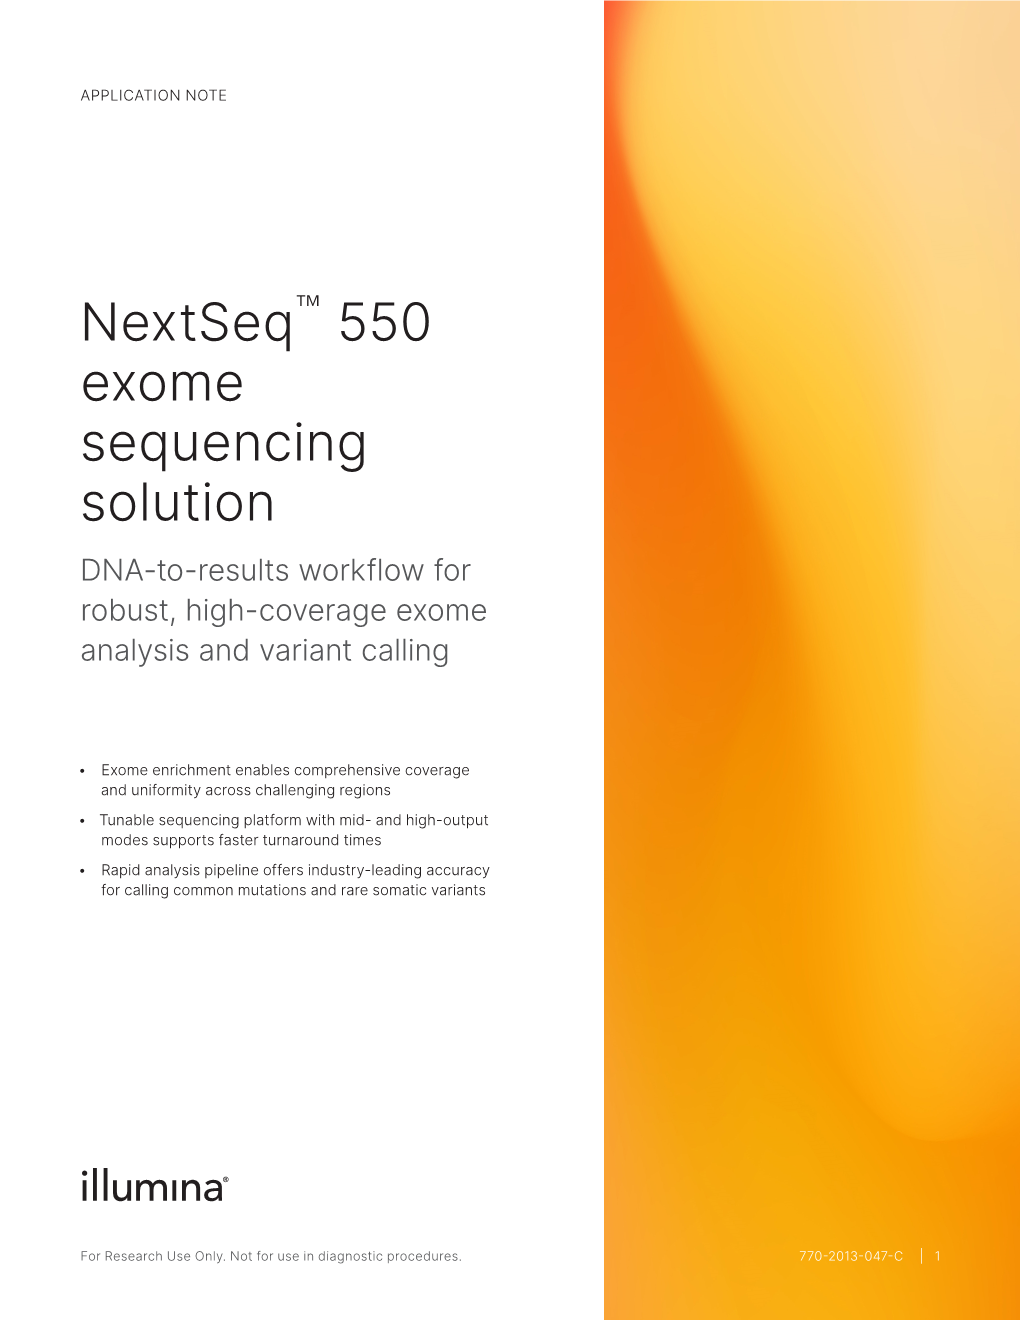 Nextseq™ 550 Exome Sequencing Solution DNA-To-Results Workflow for Robust, High-Coverage Exome Analysis and Variant Calling